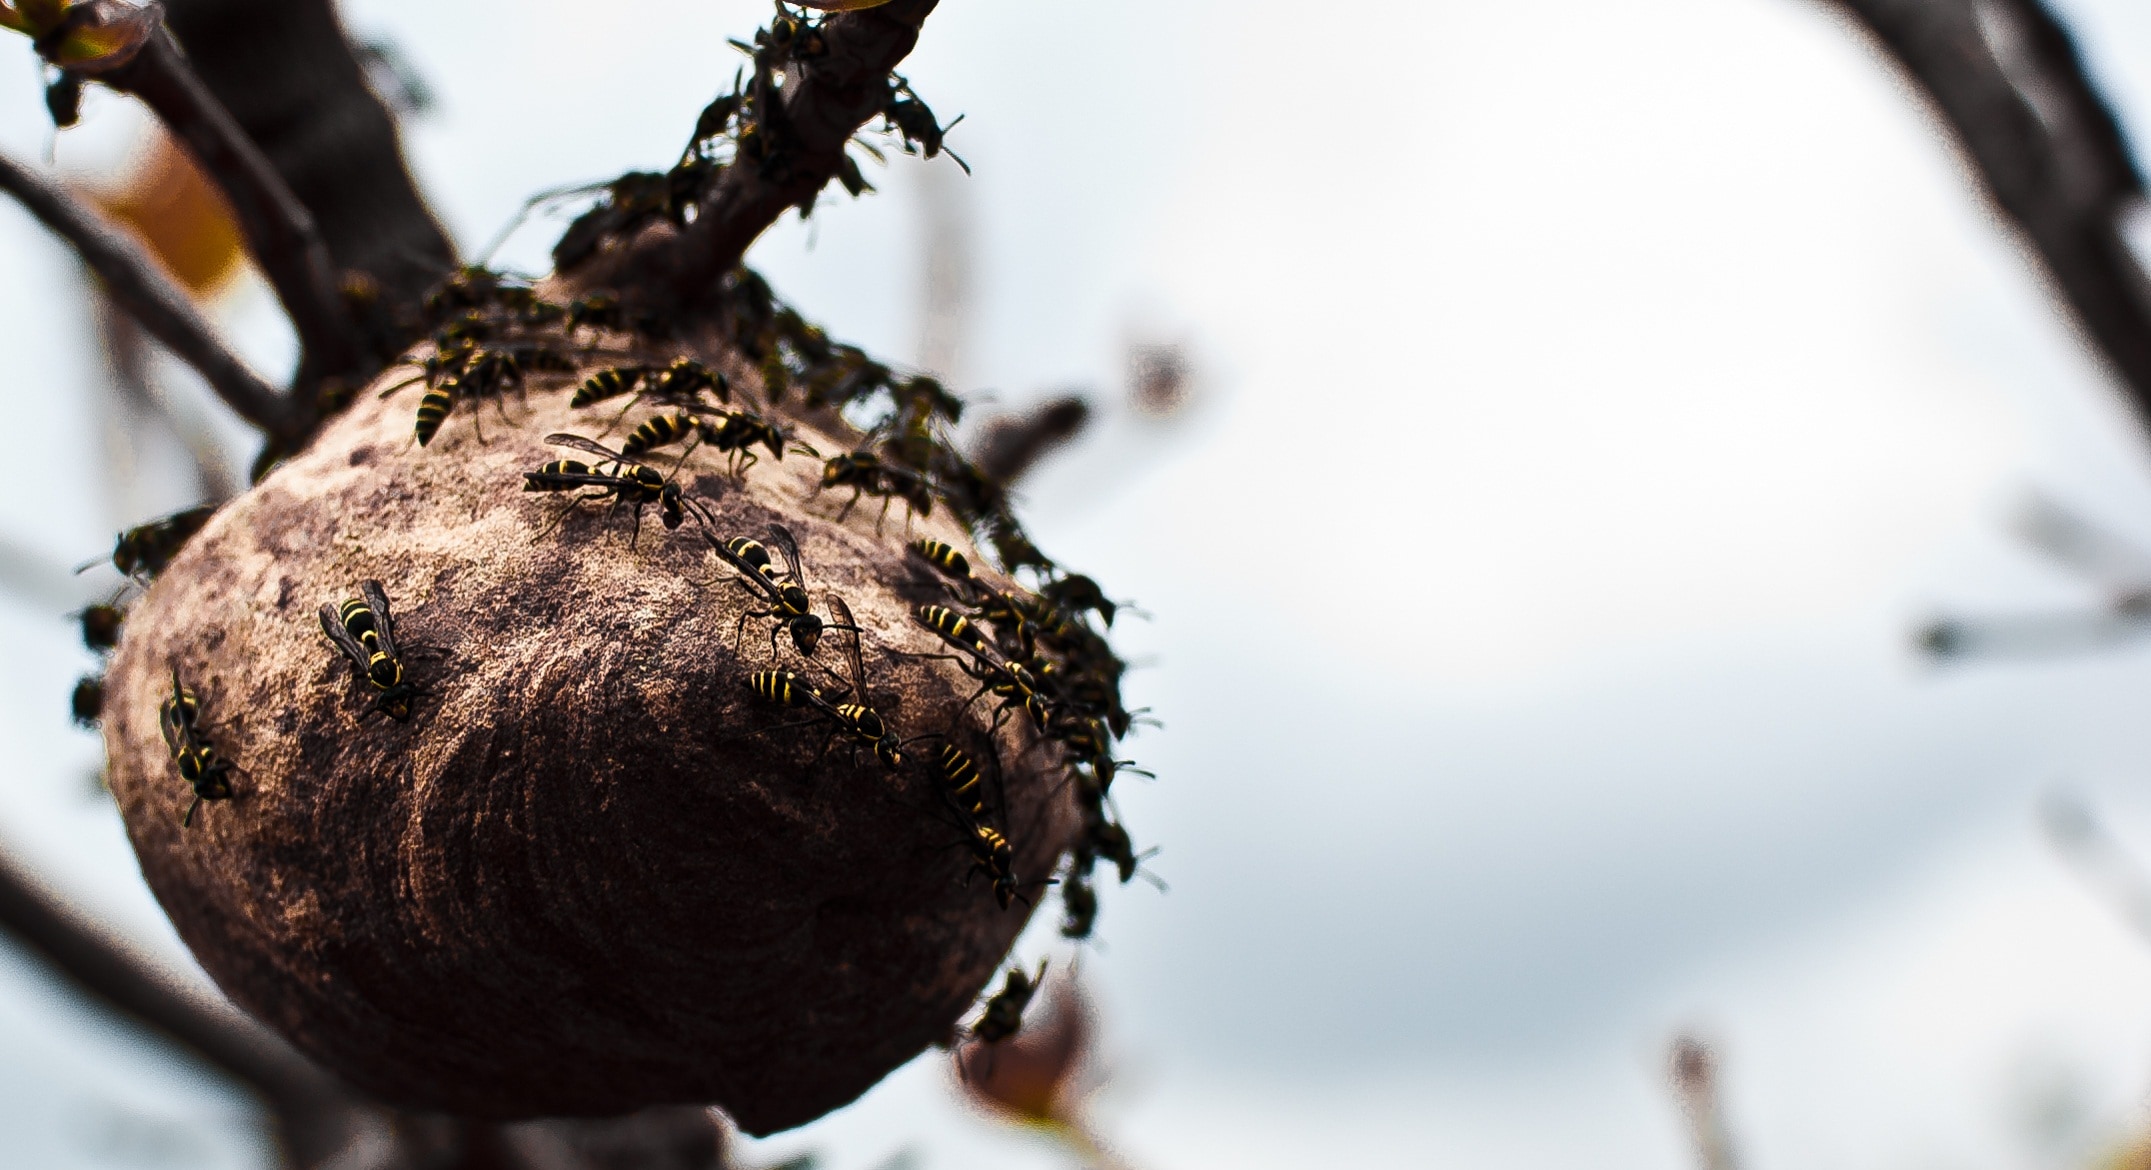 a colony of ants on brown fruits tilt shift lens